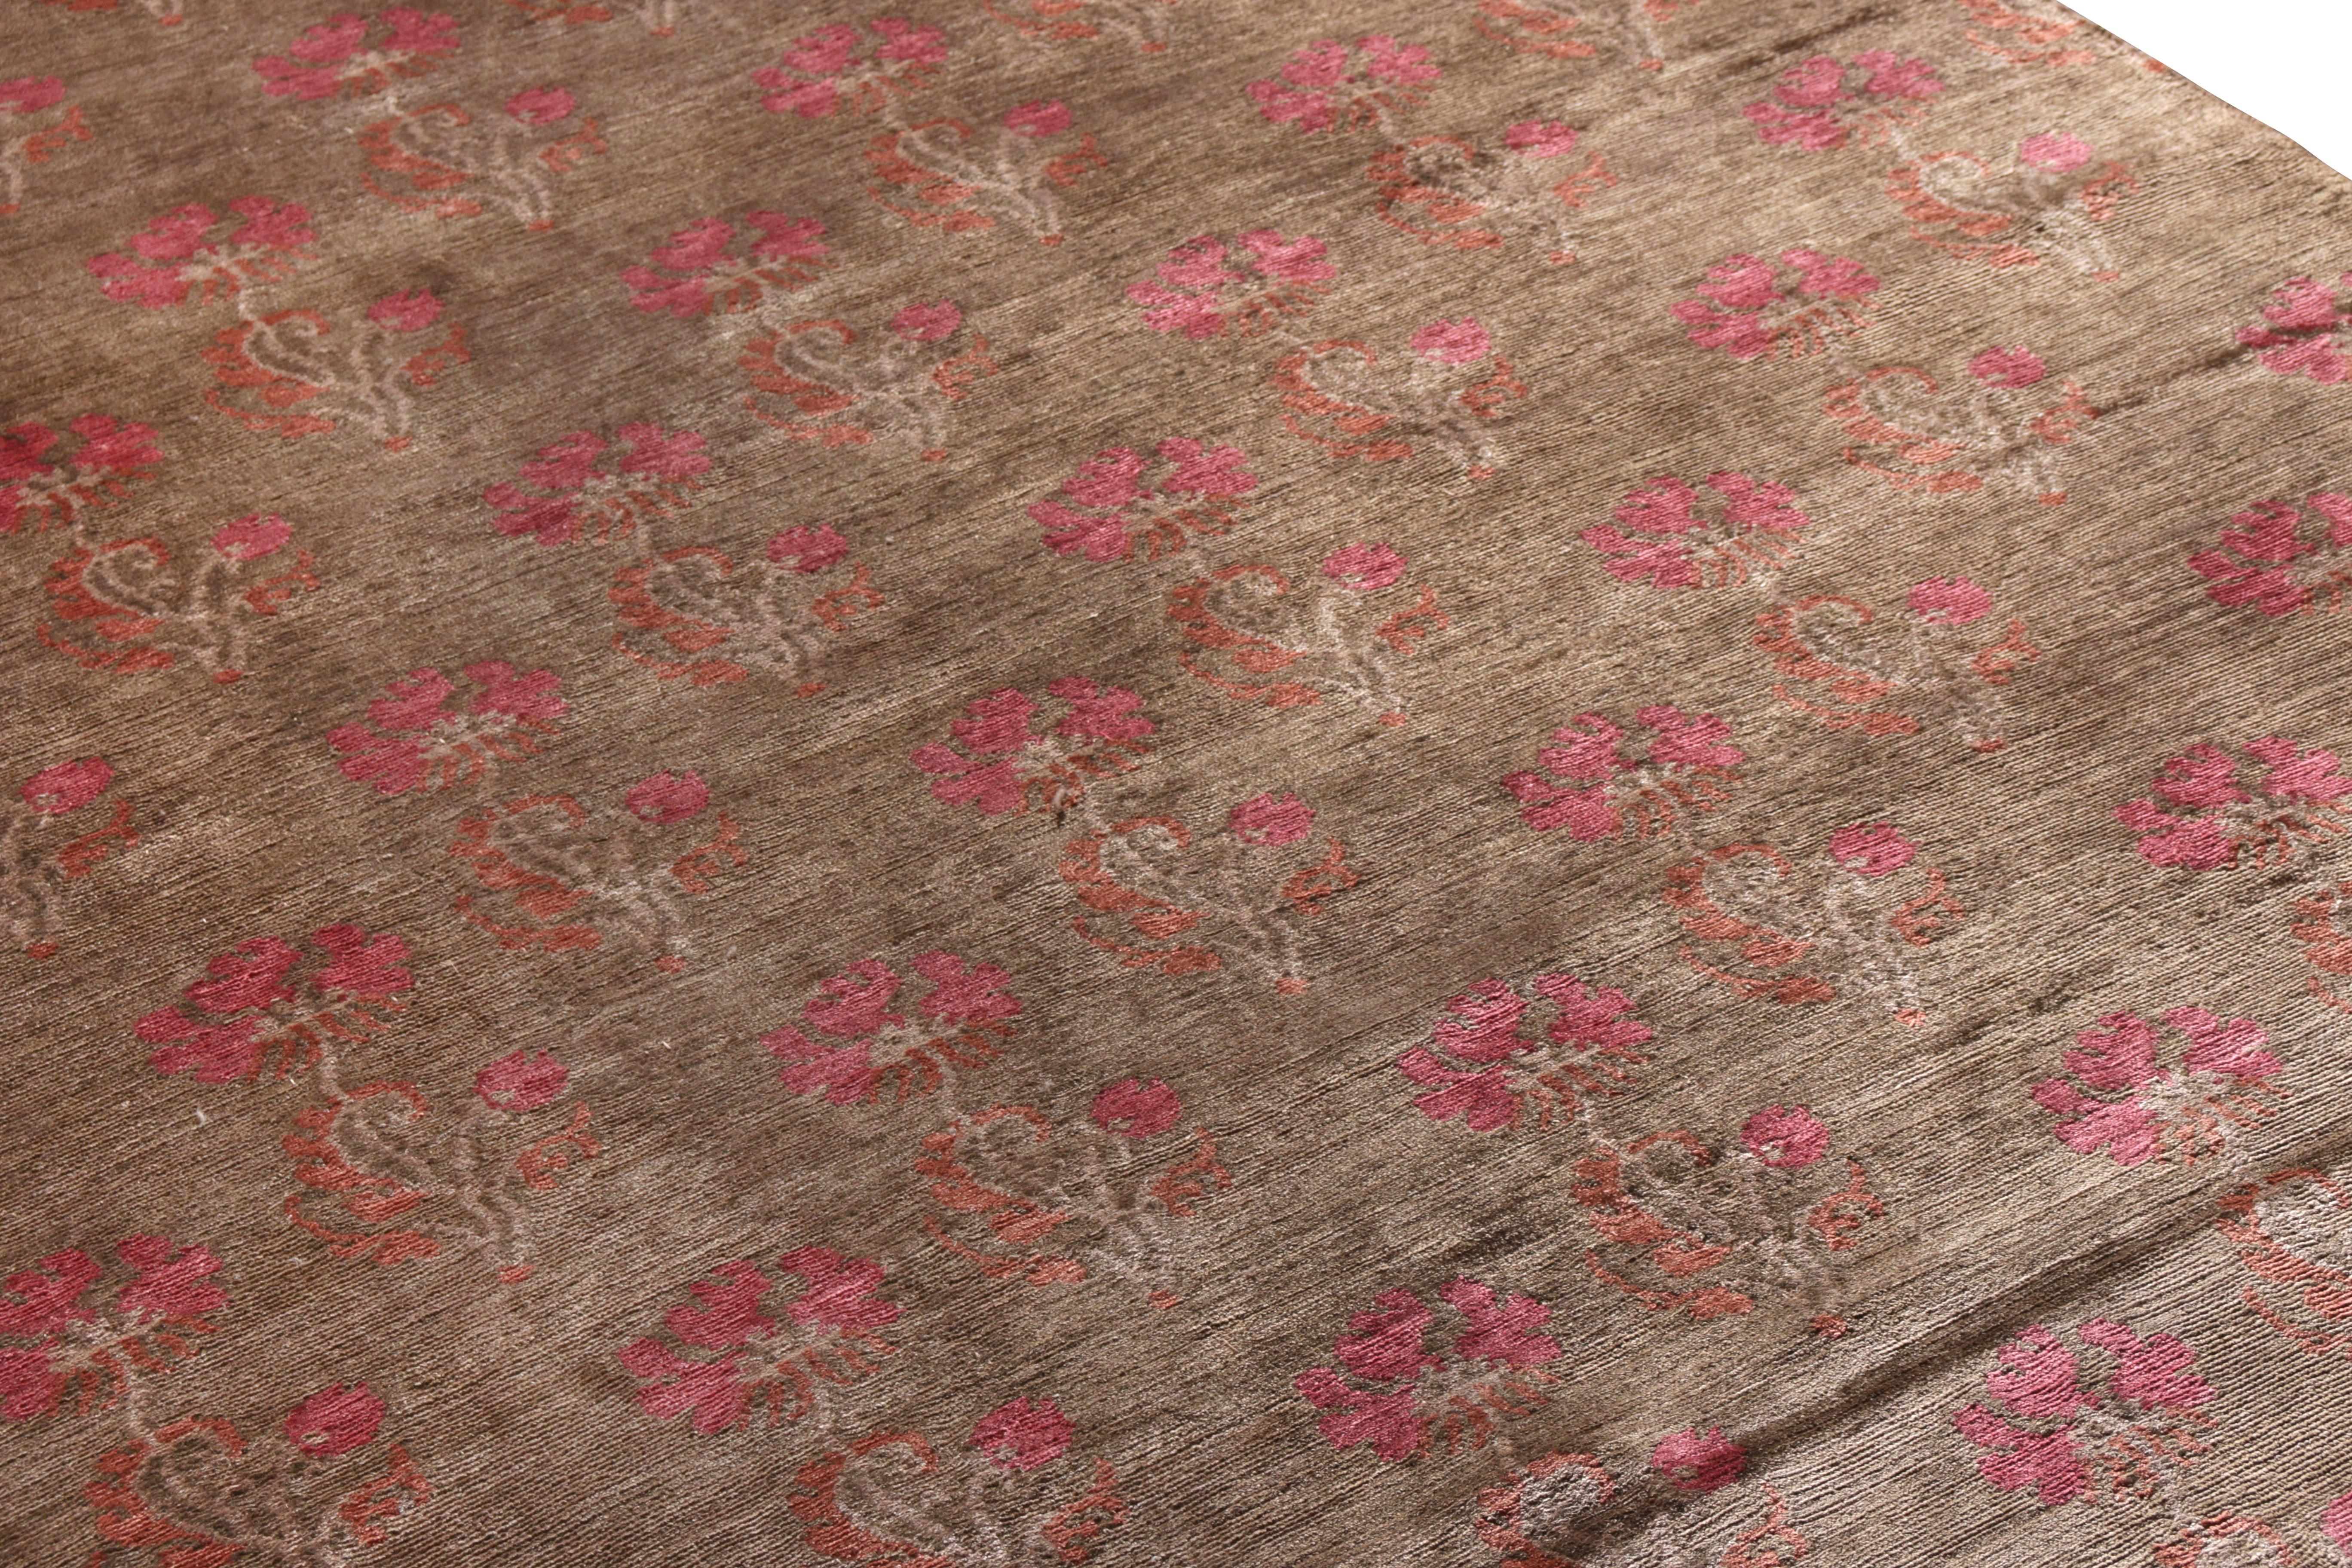 Nepalese Rug & Kilim’s Handmade Transitional Rug in Brown and Pink Floral Pattern